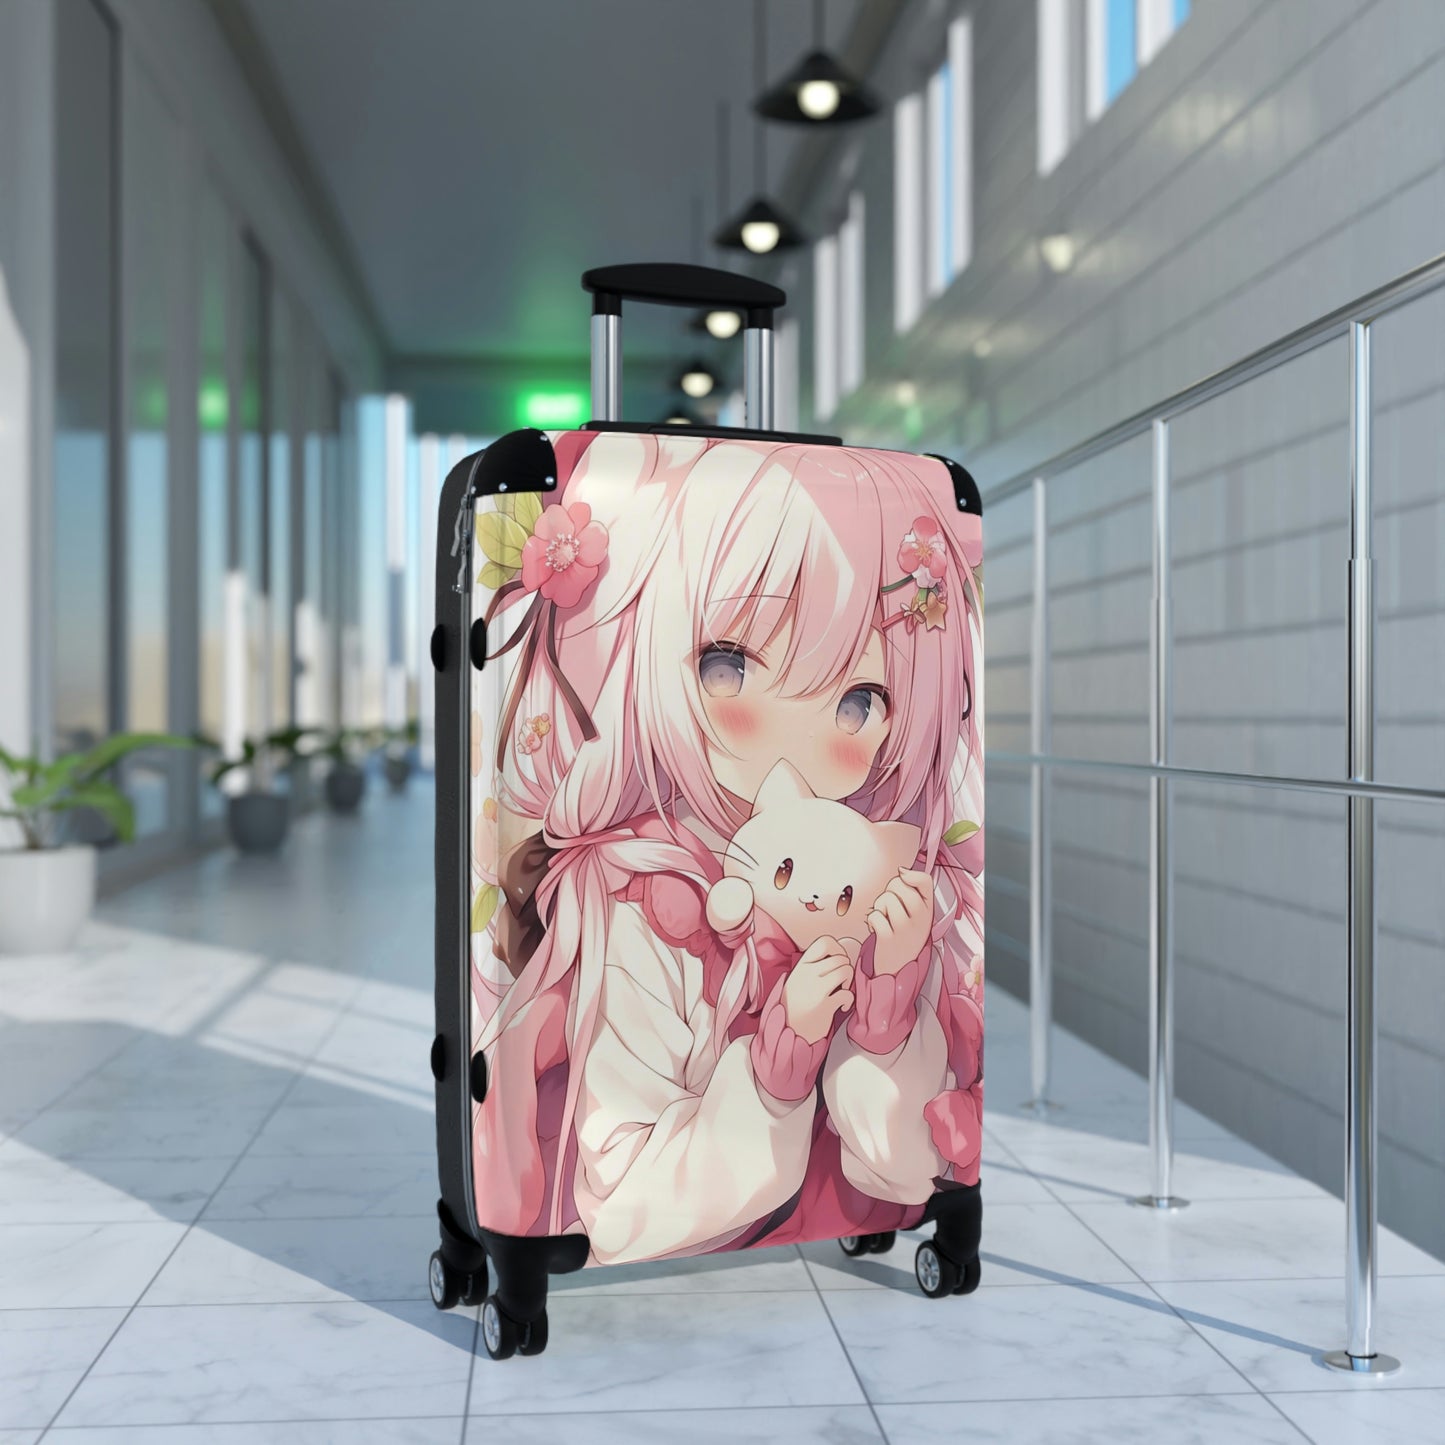 Pink Anime Suitcase Luggage, Girl Cat Kawaii Carry On 4 Wheels Cabin Travel Small Large Set Rolling Spinner Lock Designer Hard Shell Case